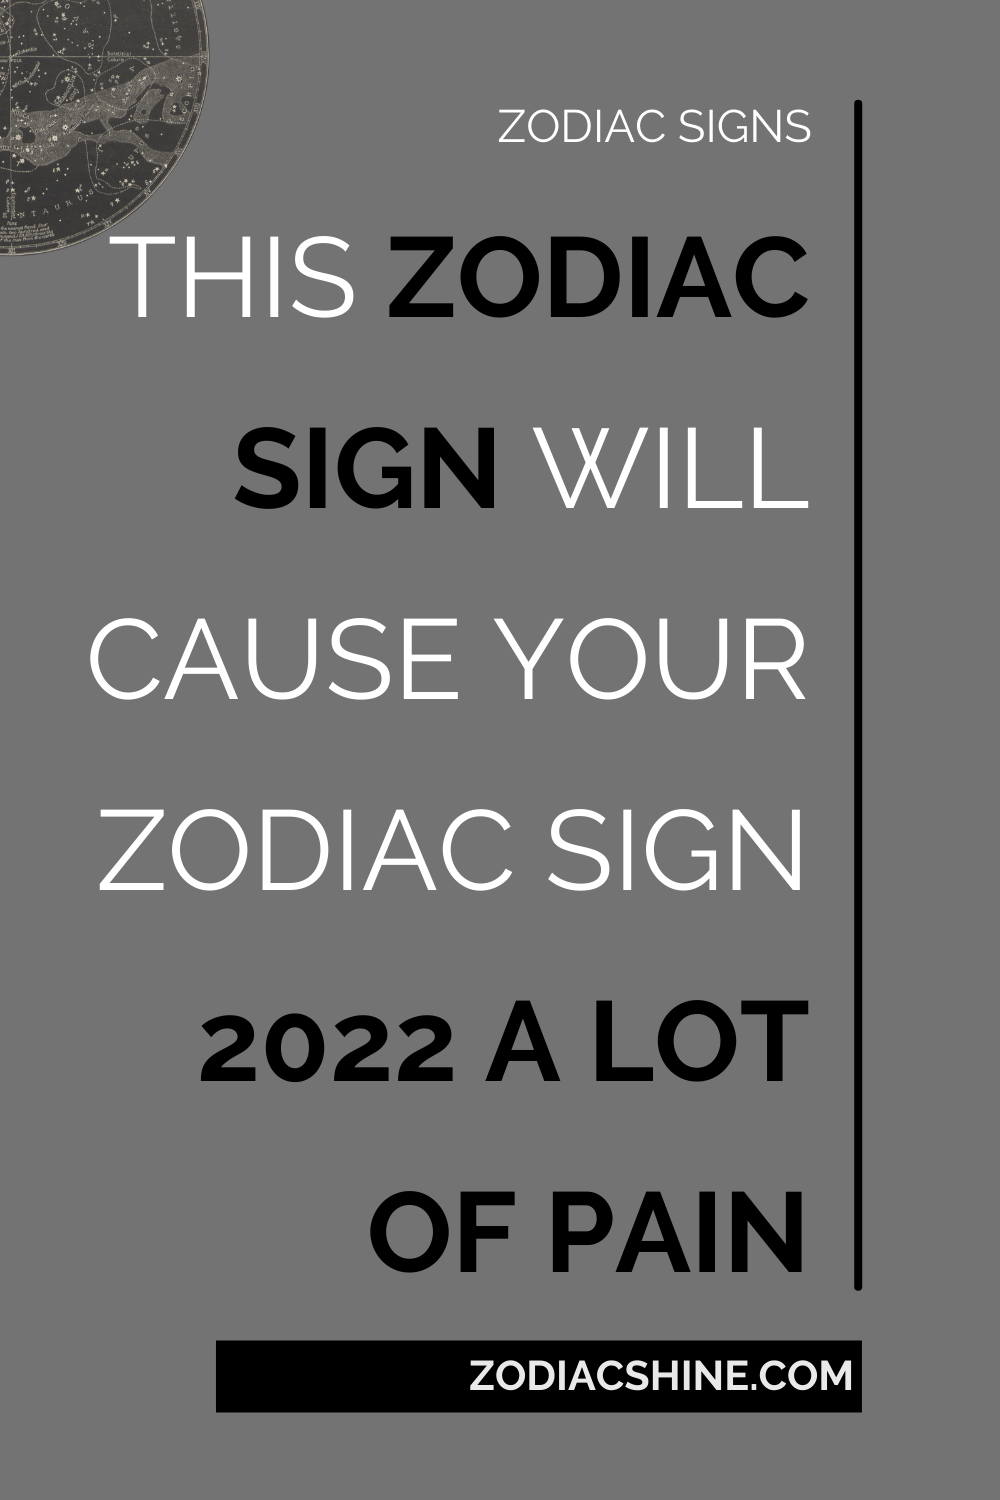 This Zodiac Sign Will Cause Your Zodiac Sign 2022 A Lot Of Pain